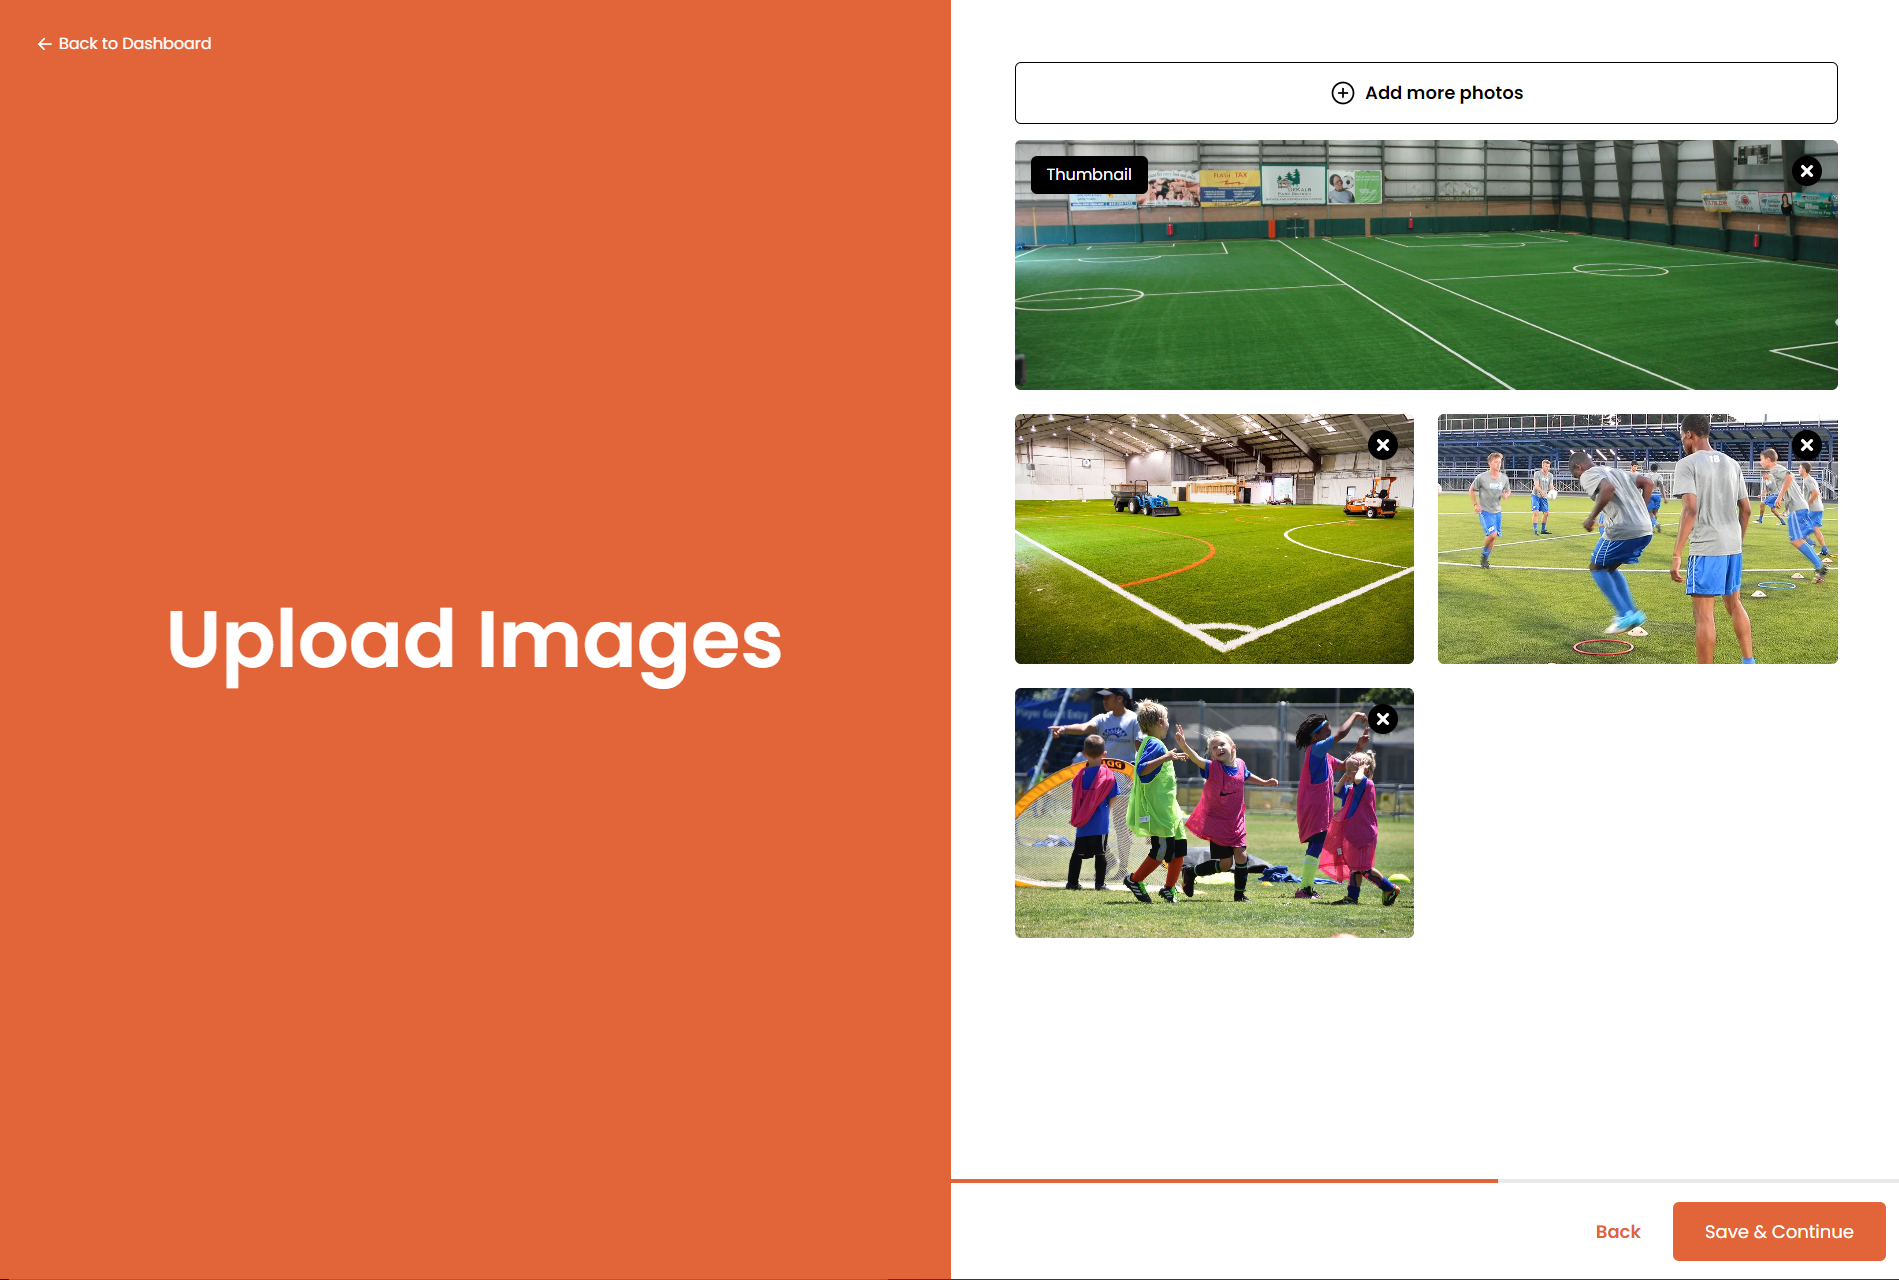 Upload images of your facility.